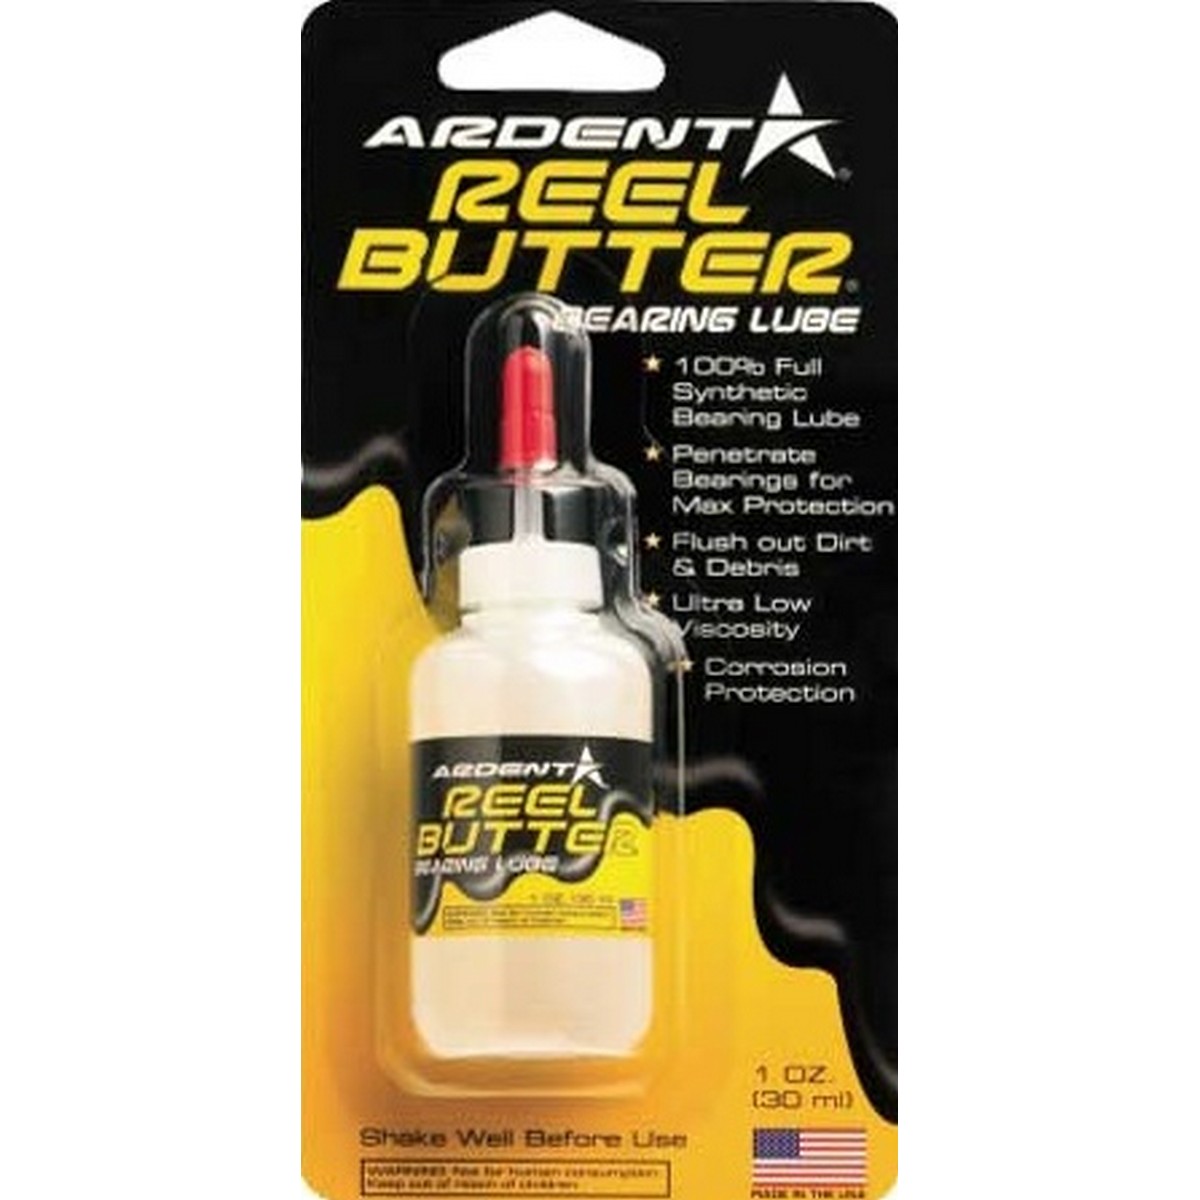 Синтетична смазка за лагери Reel Butter Bearing Lube - Ardent